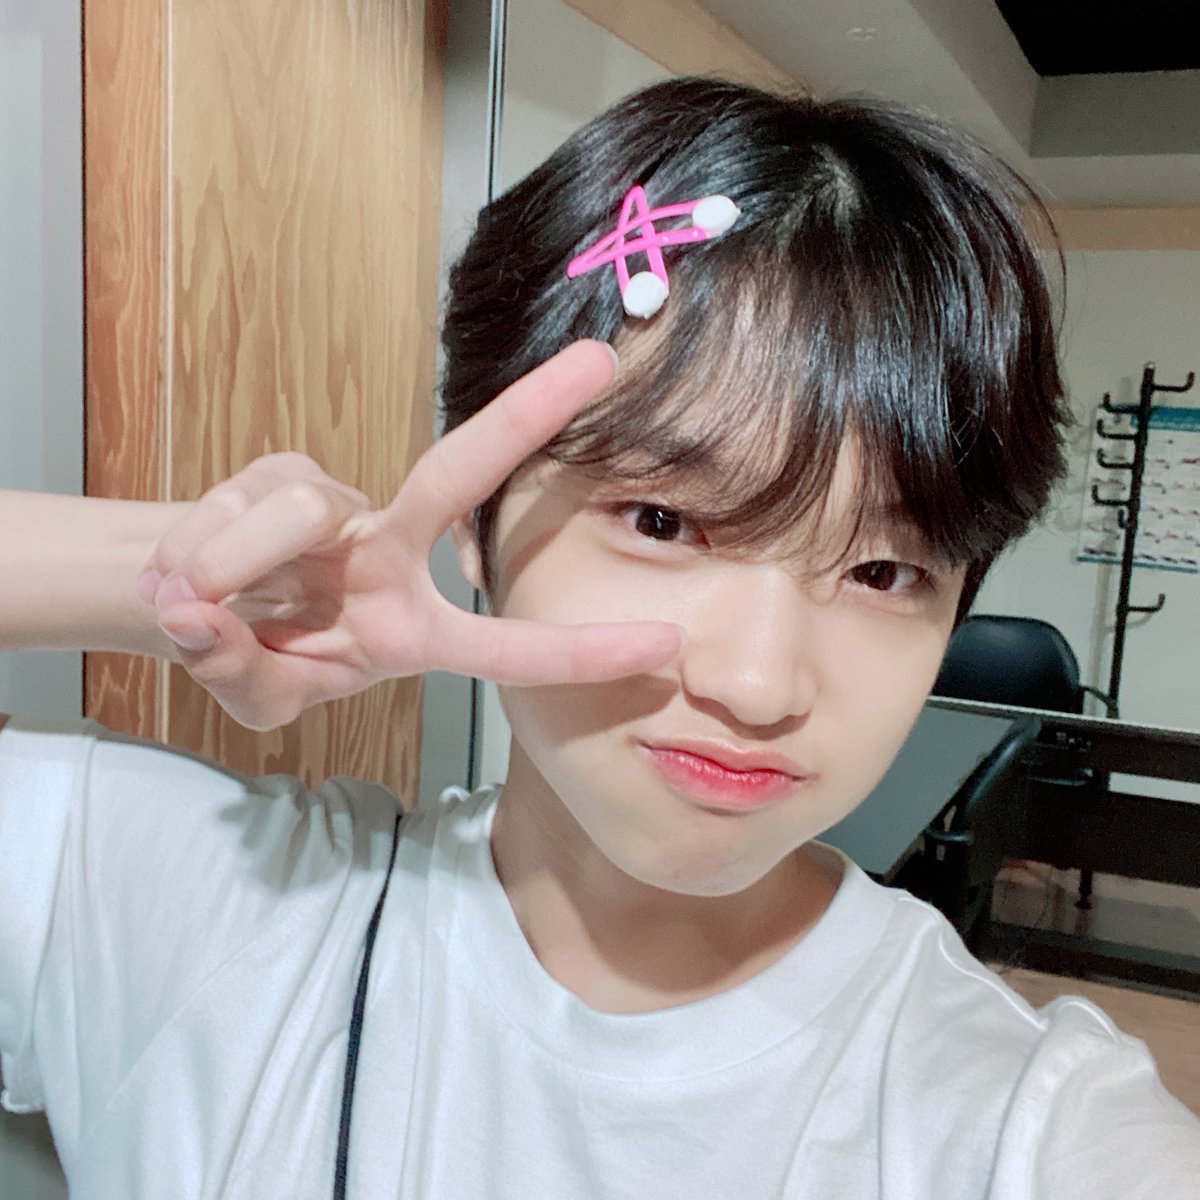 dongpyo feeding all those kpop stan's kidcore dreams when he wore pink hairclips